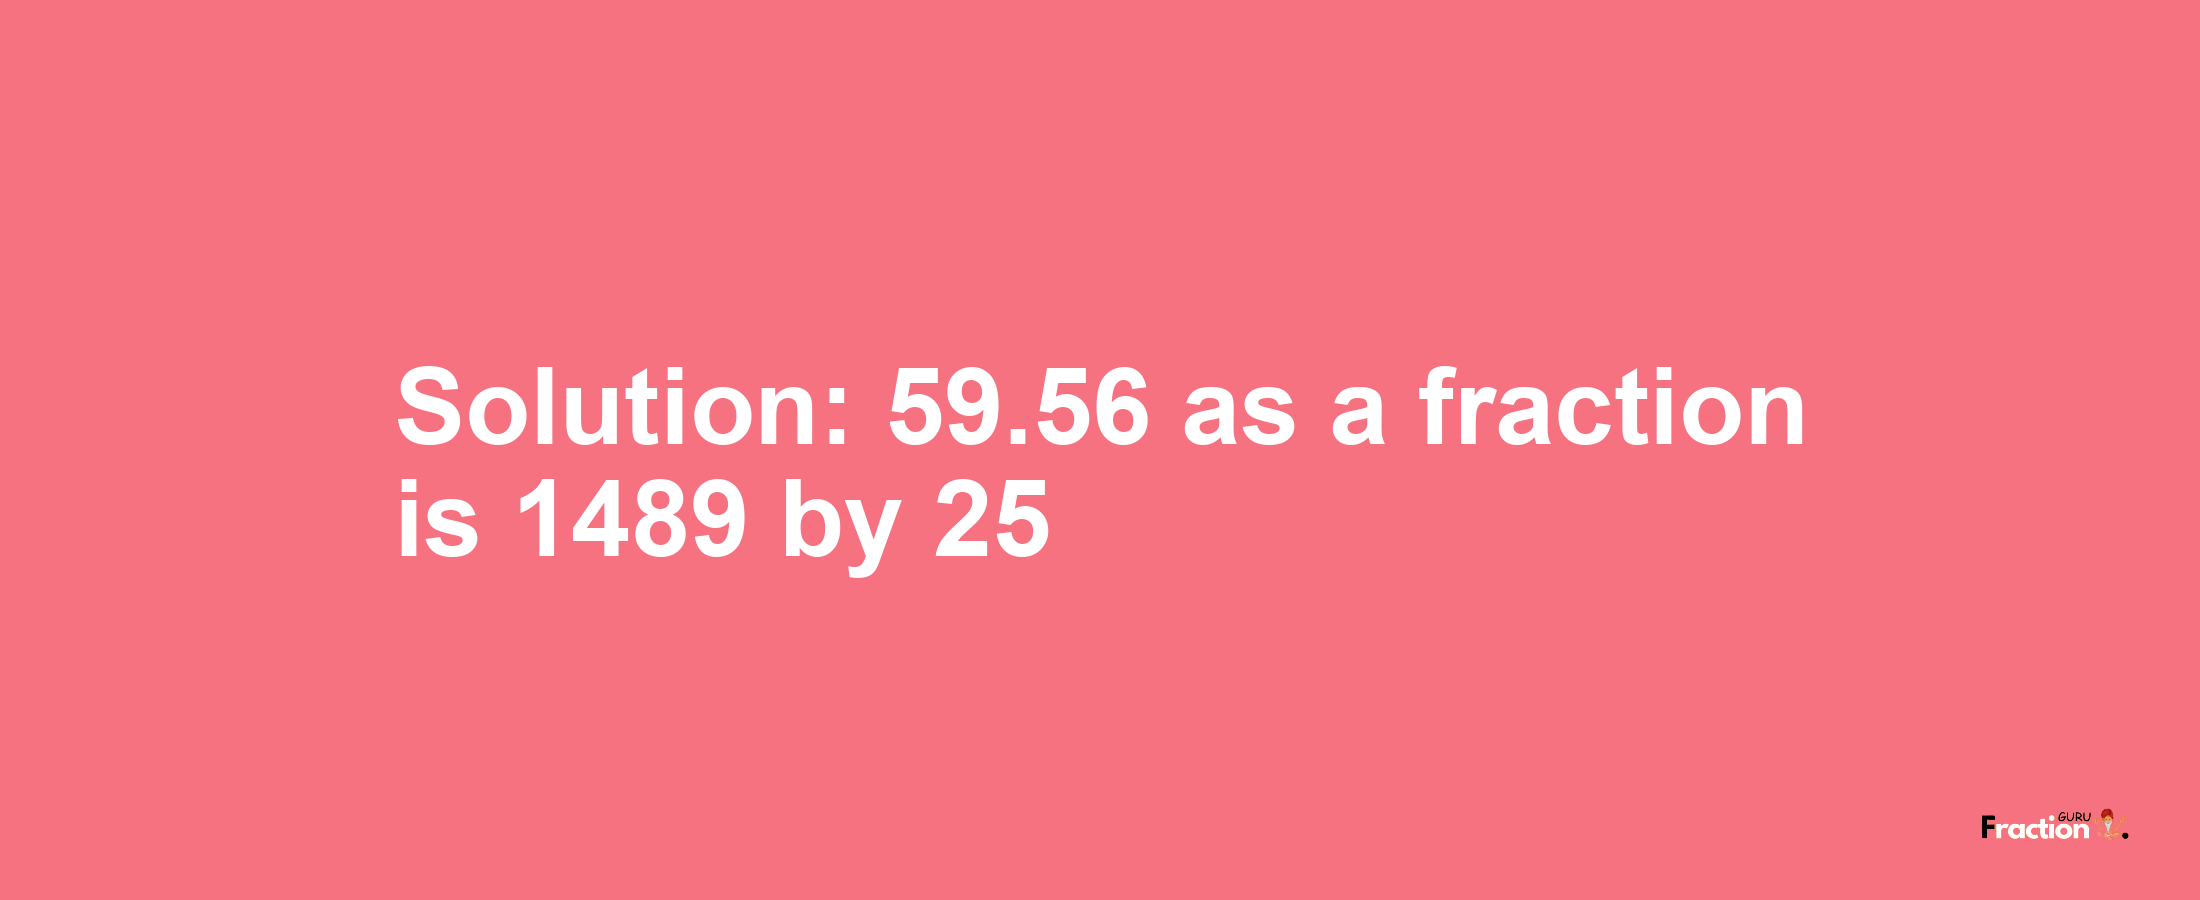 Solution:59.56 as a fraction is 1489/25